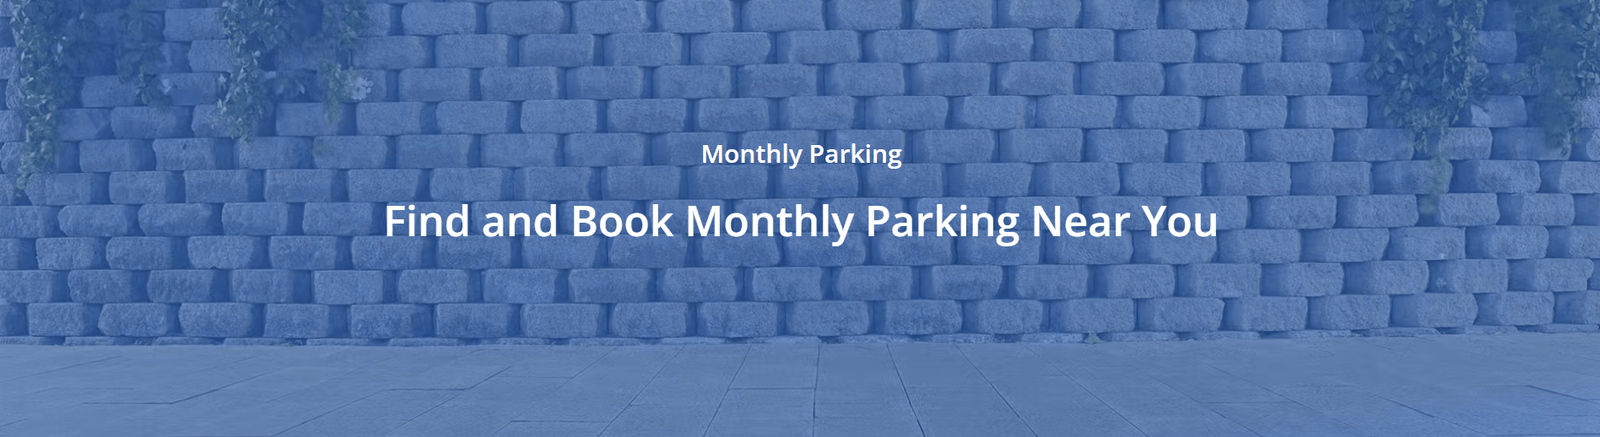 SpotHero Monthly Parking